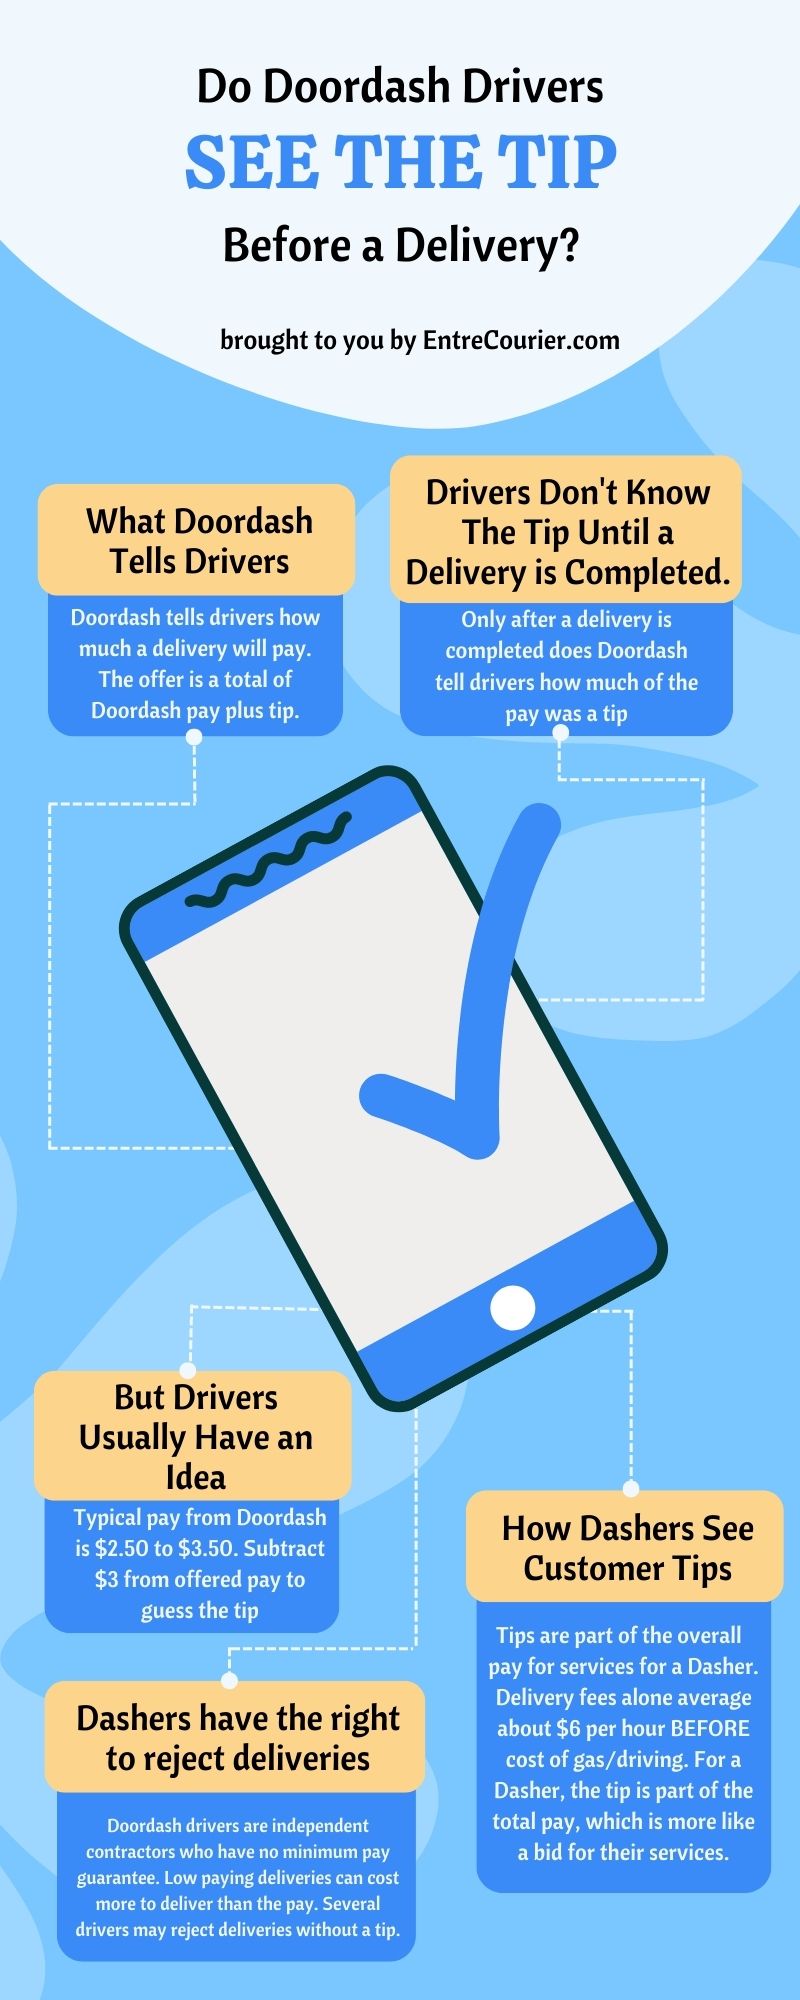 Infographic asking do Doordash drivers see the tip before delivery? With five points discussing what Doordash tells drivers, what drivers know, how Dashers can guess the tip, that Dashers can reject deliveries and how Dashers see tips.